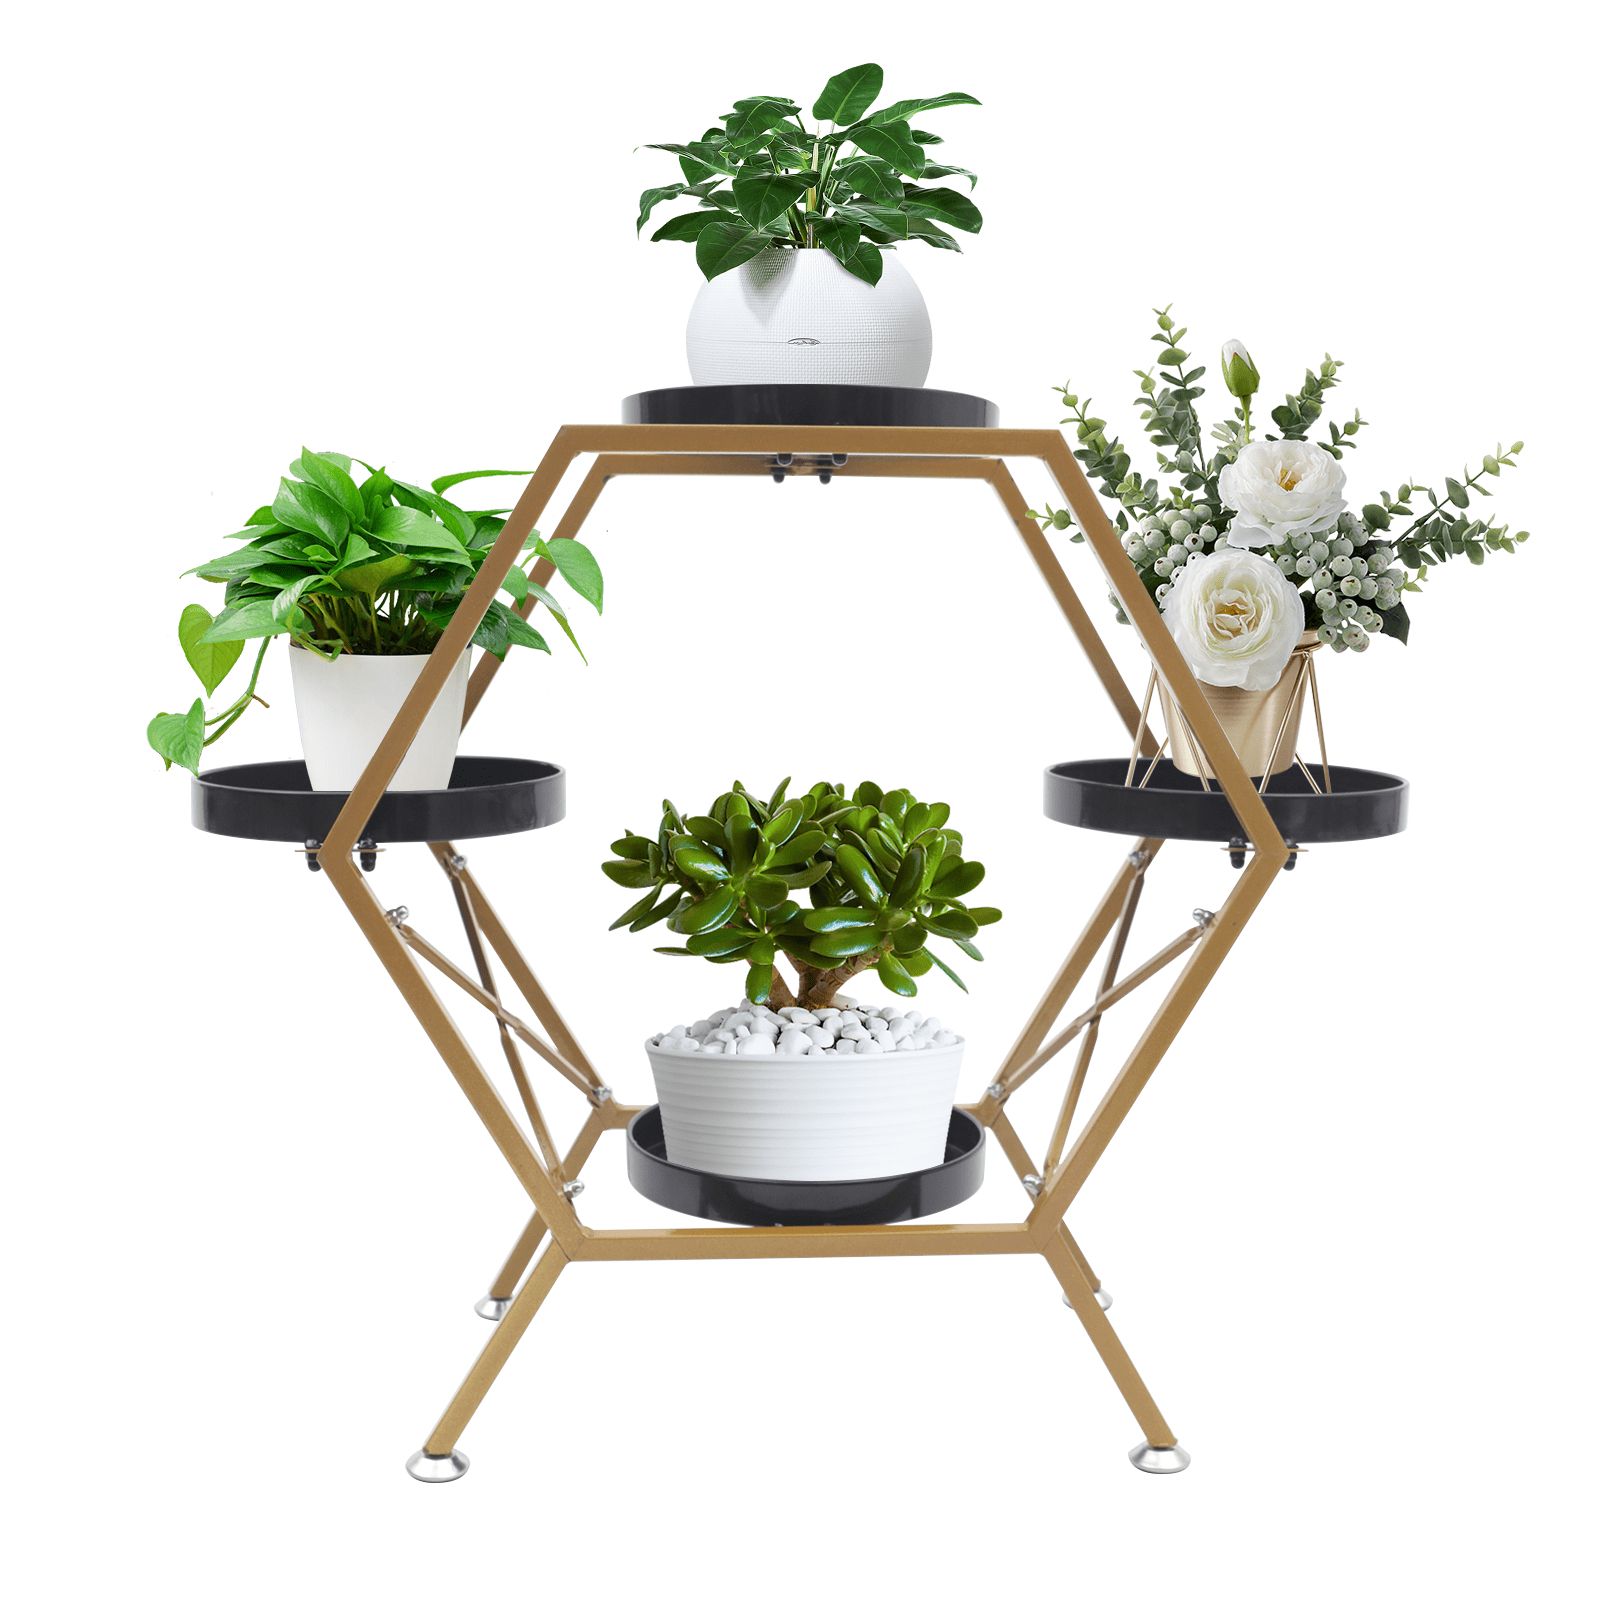 Ethedeal Hexagon Gold Metal Plant Stand 4 Trays Flower Pot Holder Display  Garden Balcony – Walmart Inside 2017 Hexagon Plant Stands (View 9 of 10)